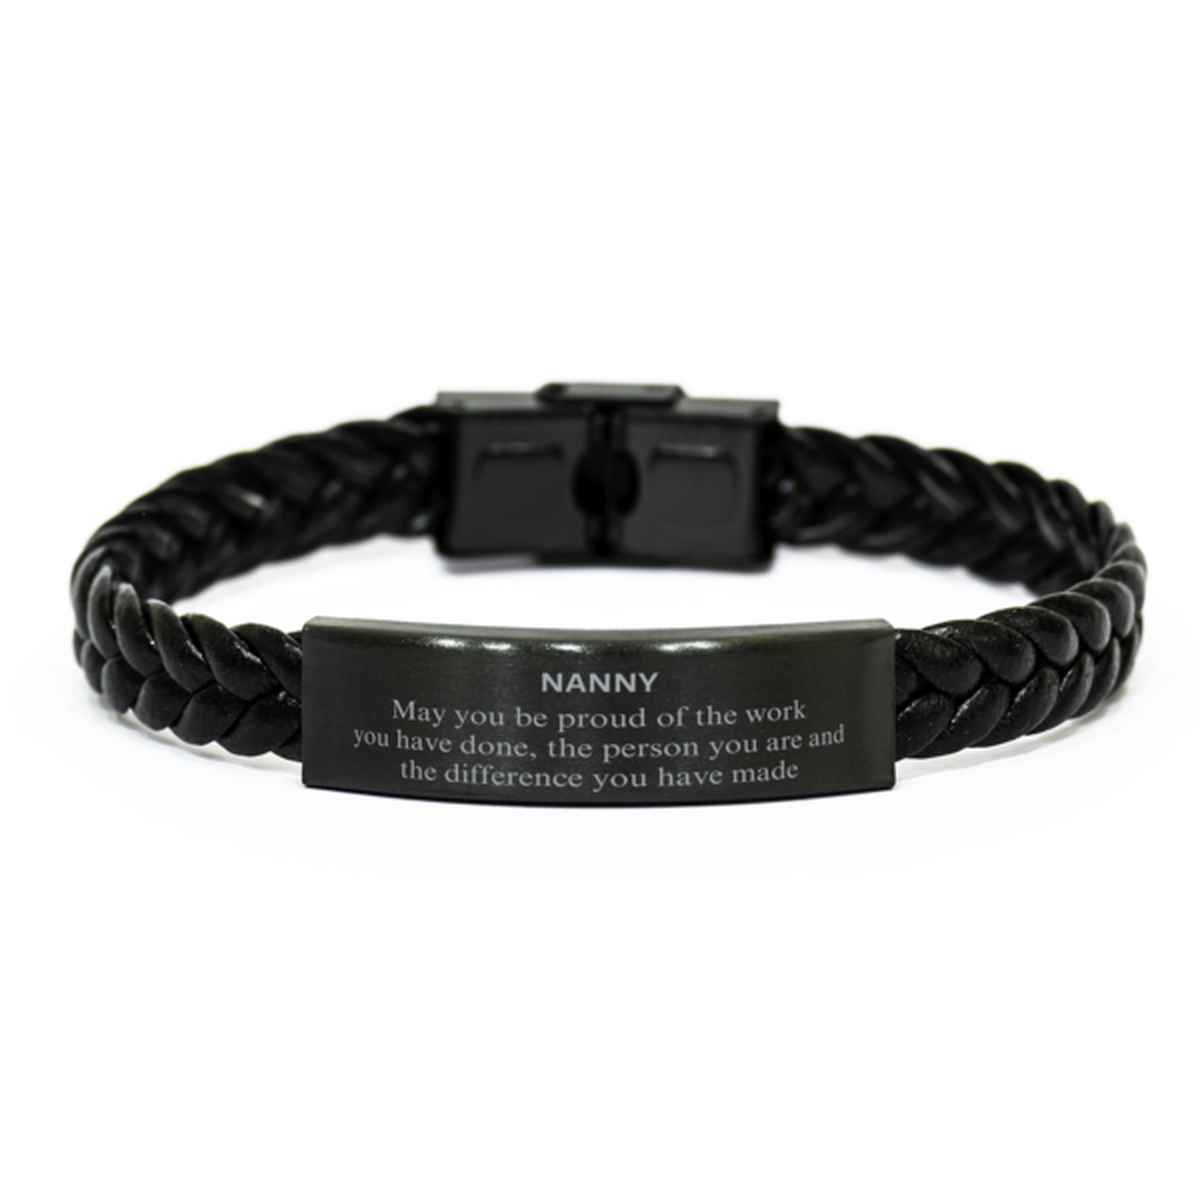 Nanny May you be proud of the work you have done, Retirement Nanny Braided Leather Bracelet for Colleague Appreciation Gifts Amazing for Nanny